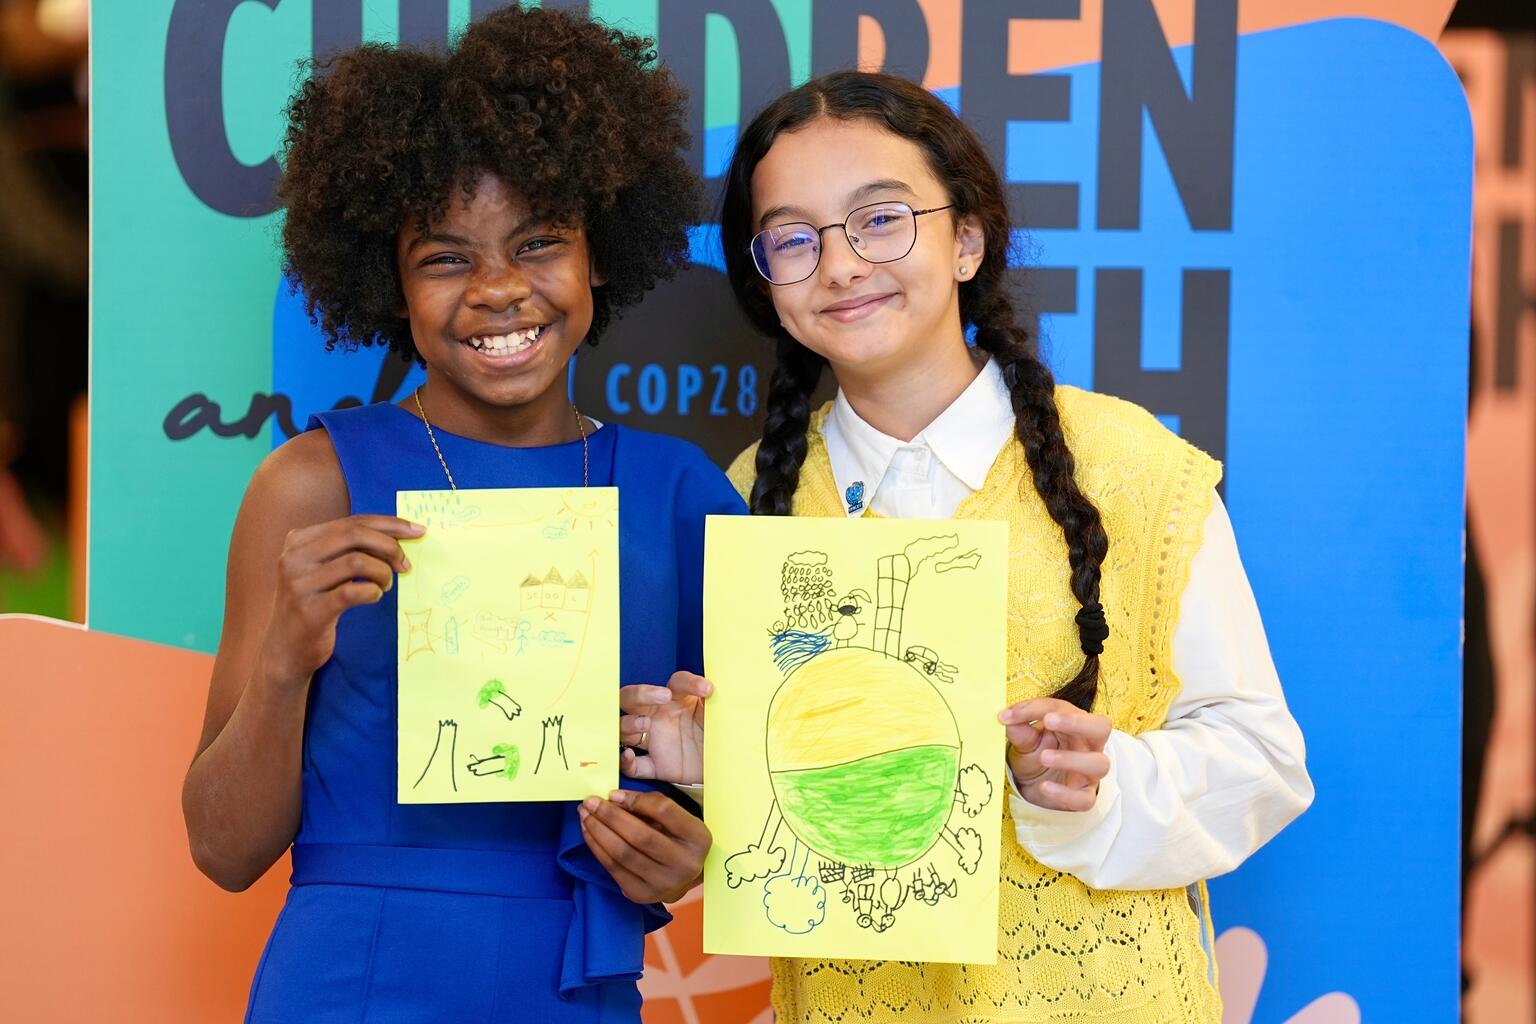 On 8 December 2023 at the UN Climate Change Conference (COP28) at Expo City Dubai in the United Arab Emirates, Lova Renee, 13-year-old UNICEF Youth Advocate from Madagascar, and Revan Ahmed, 13-year-old UNICEF Youth Advocate from Libya, pose for a photo with their drawings.